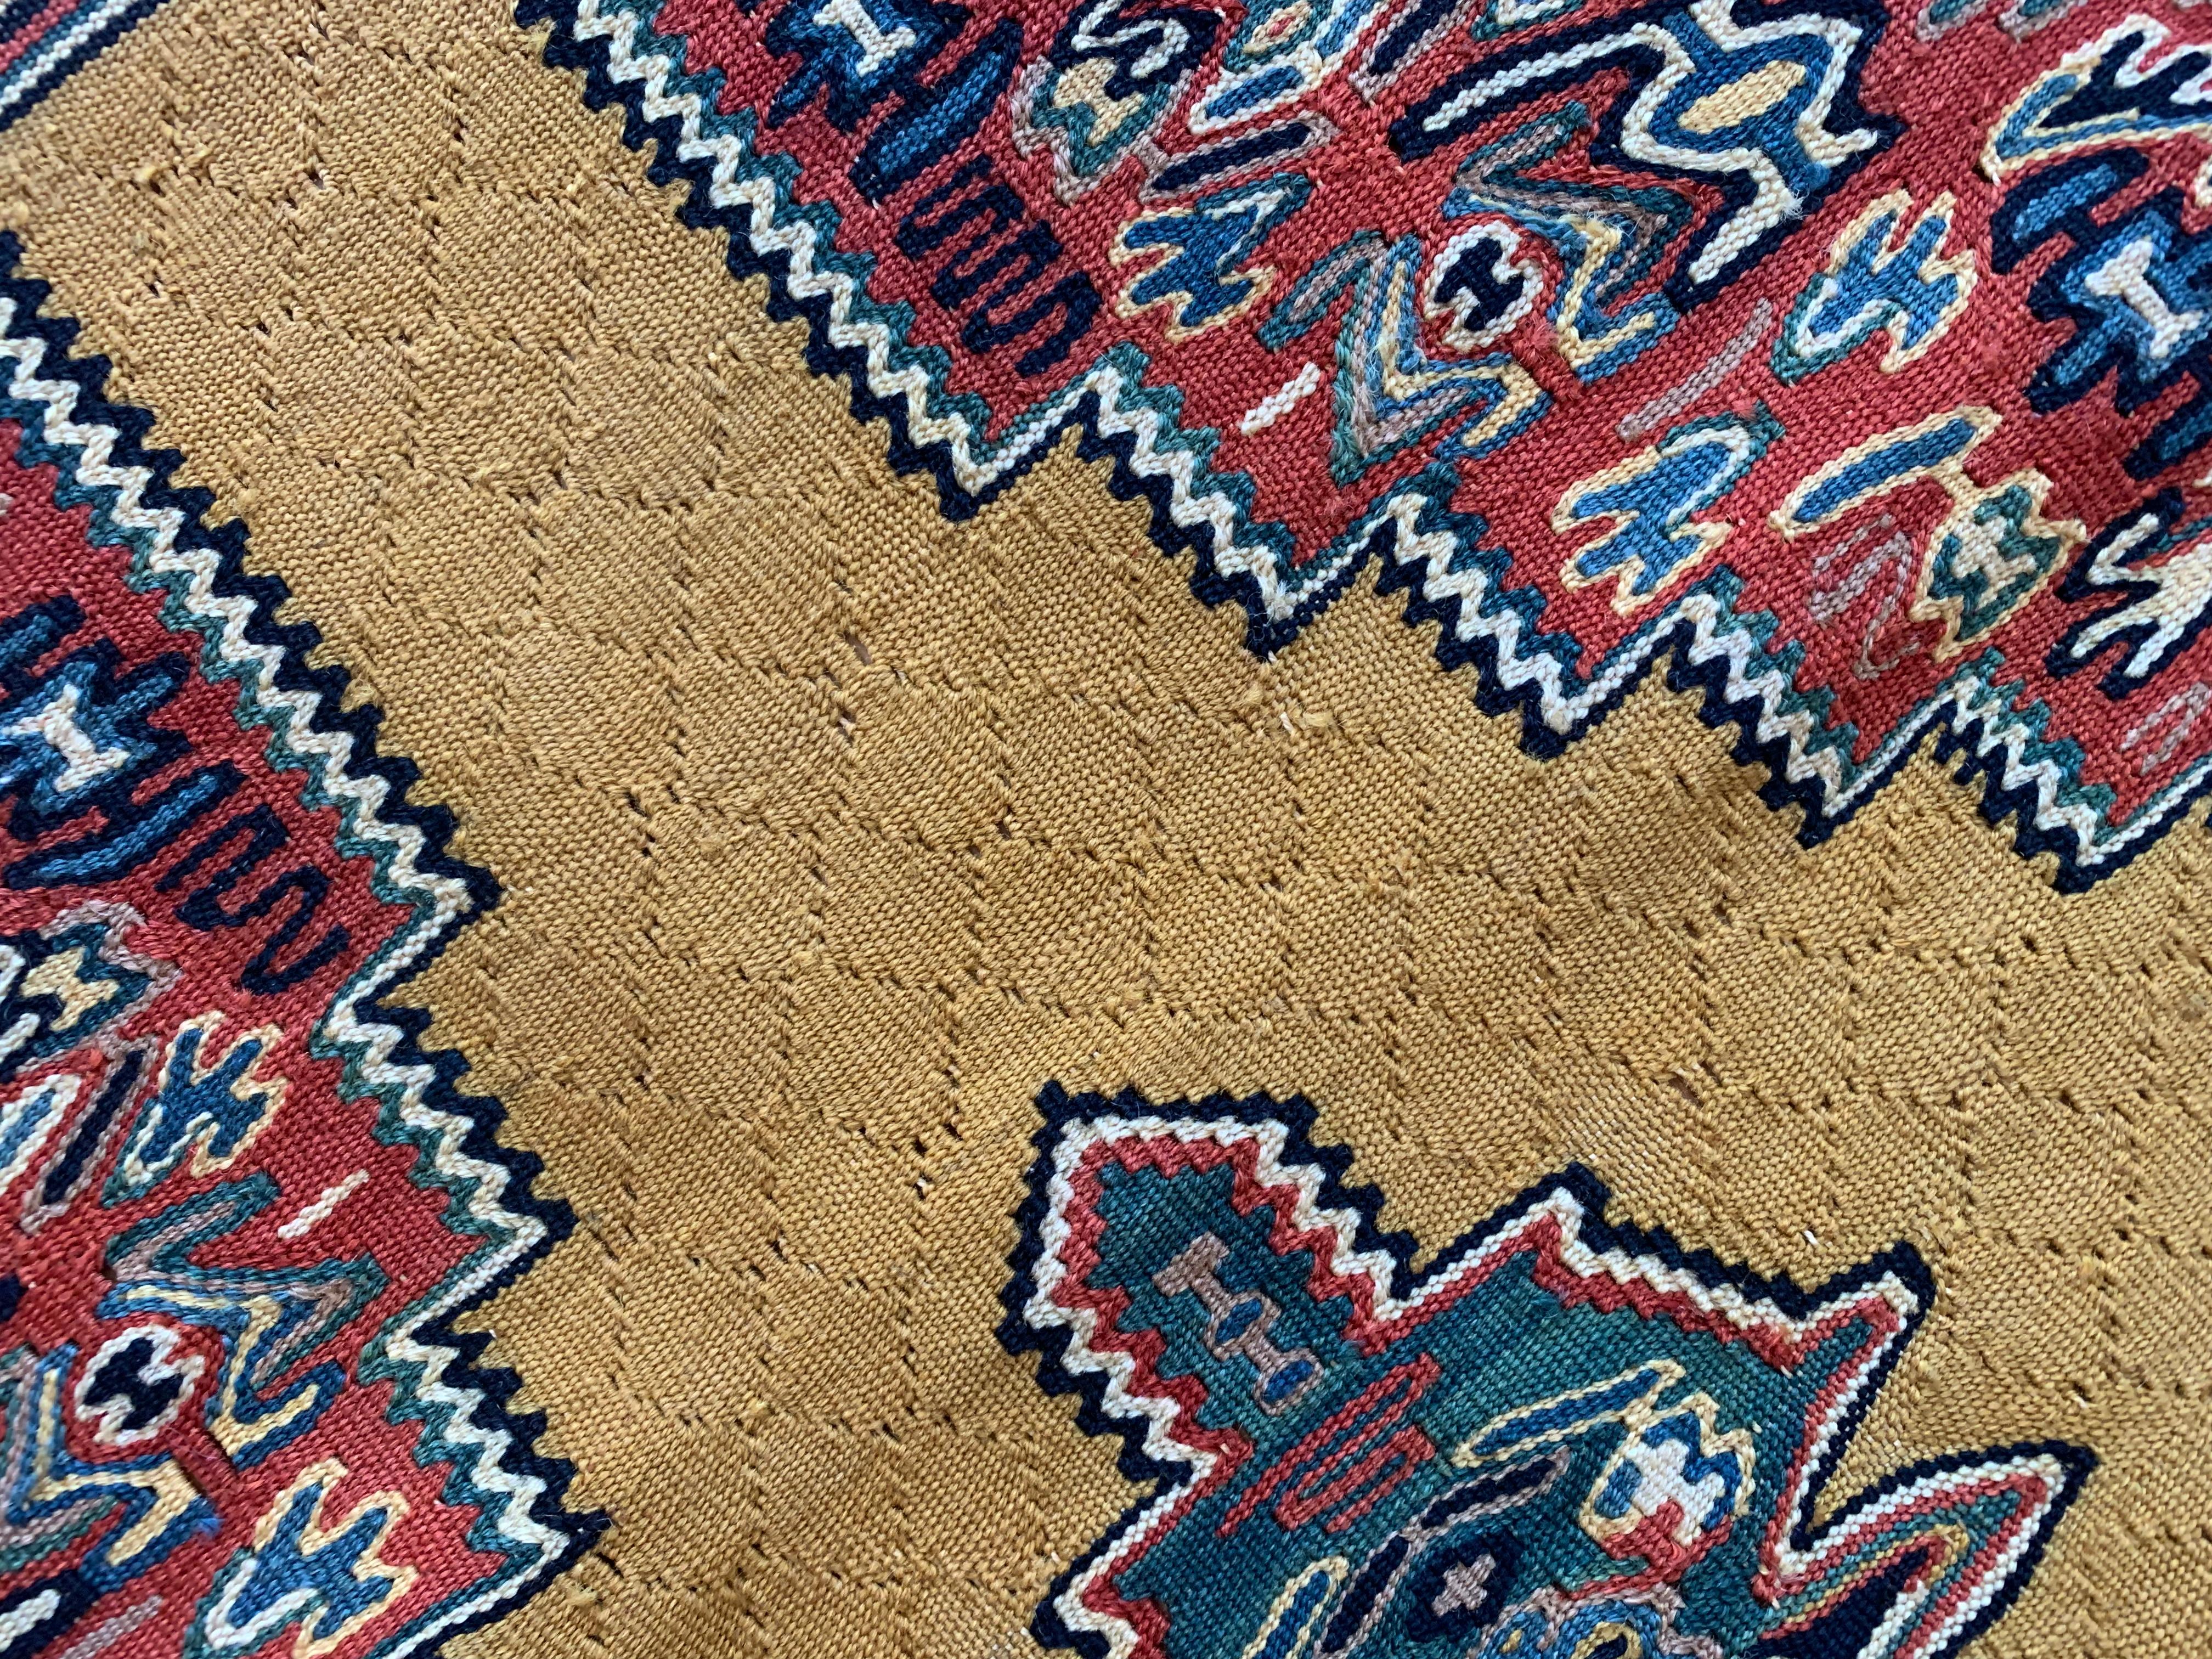 These bold wool rugs are a matching pair of handmade flatwoven kilims, woven by hand in the early 2000s, circa 2010. The design features geometric medallion woven in accents of ivory, green and red on a yellow background. This has then been framed